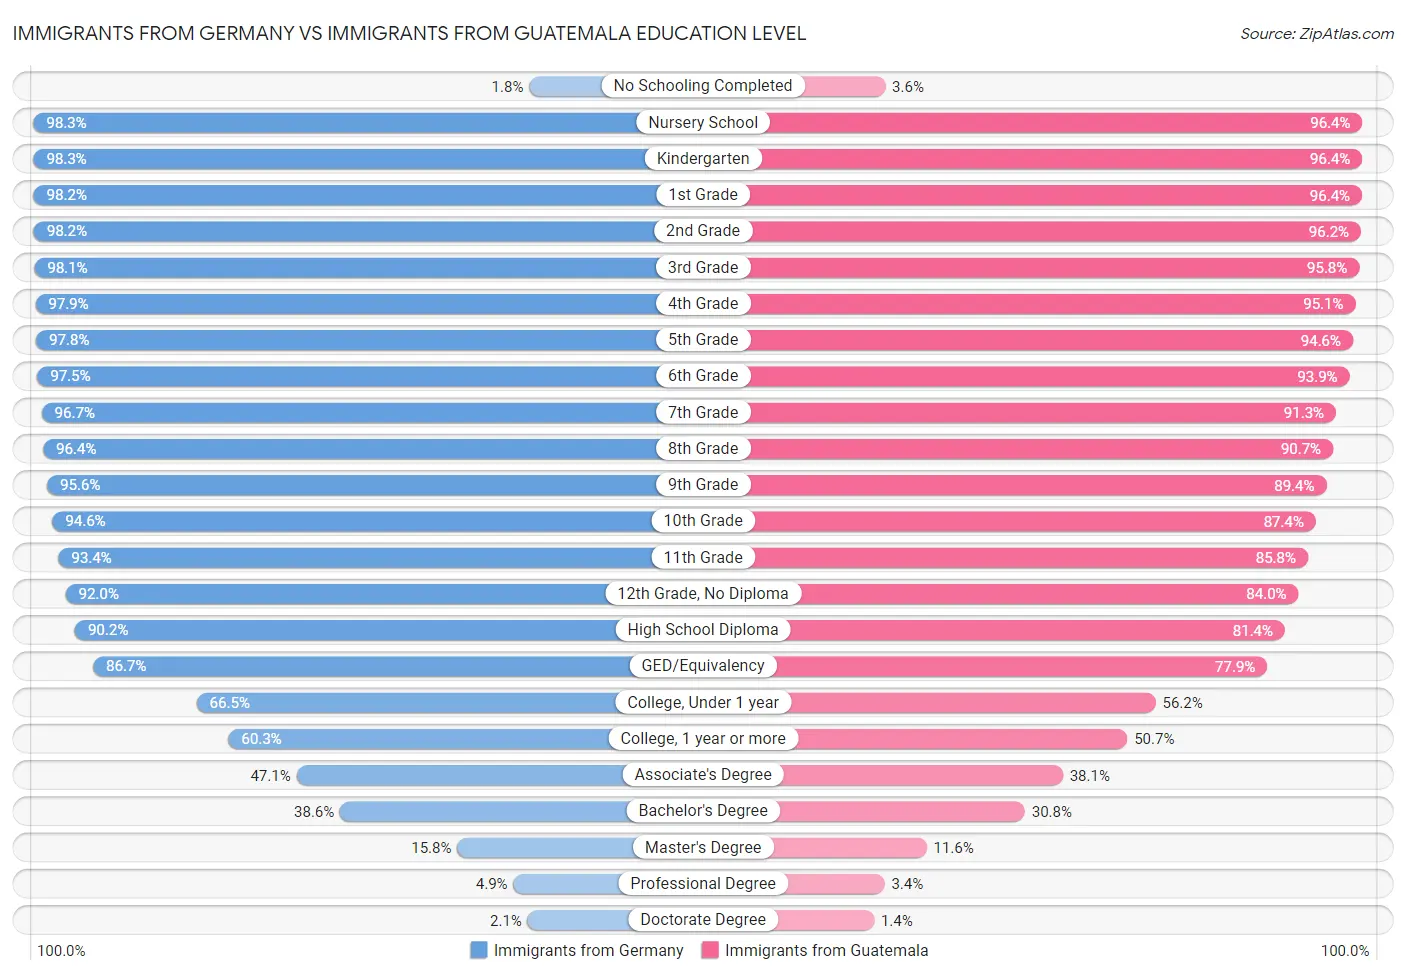 Immigrants from Germany vs Immigrants from Guatemala Education Level